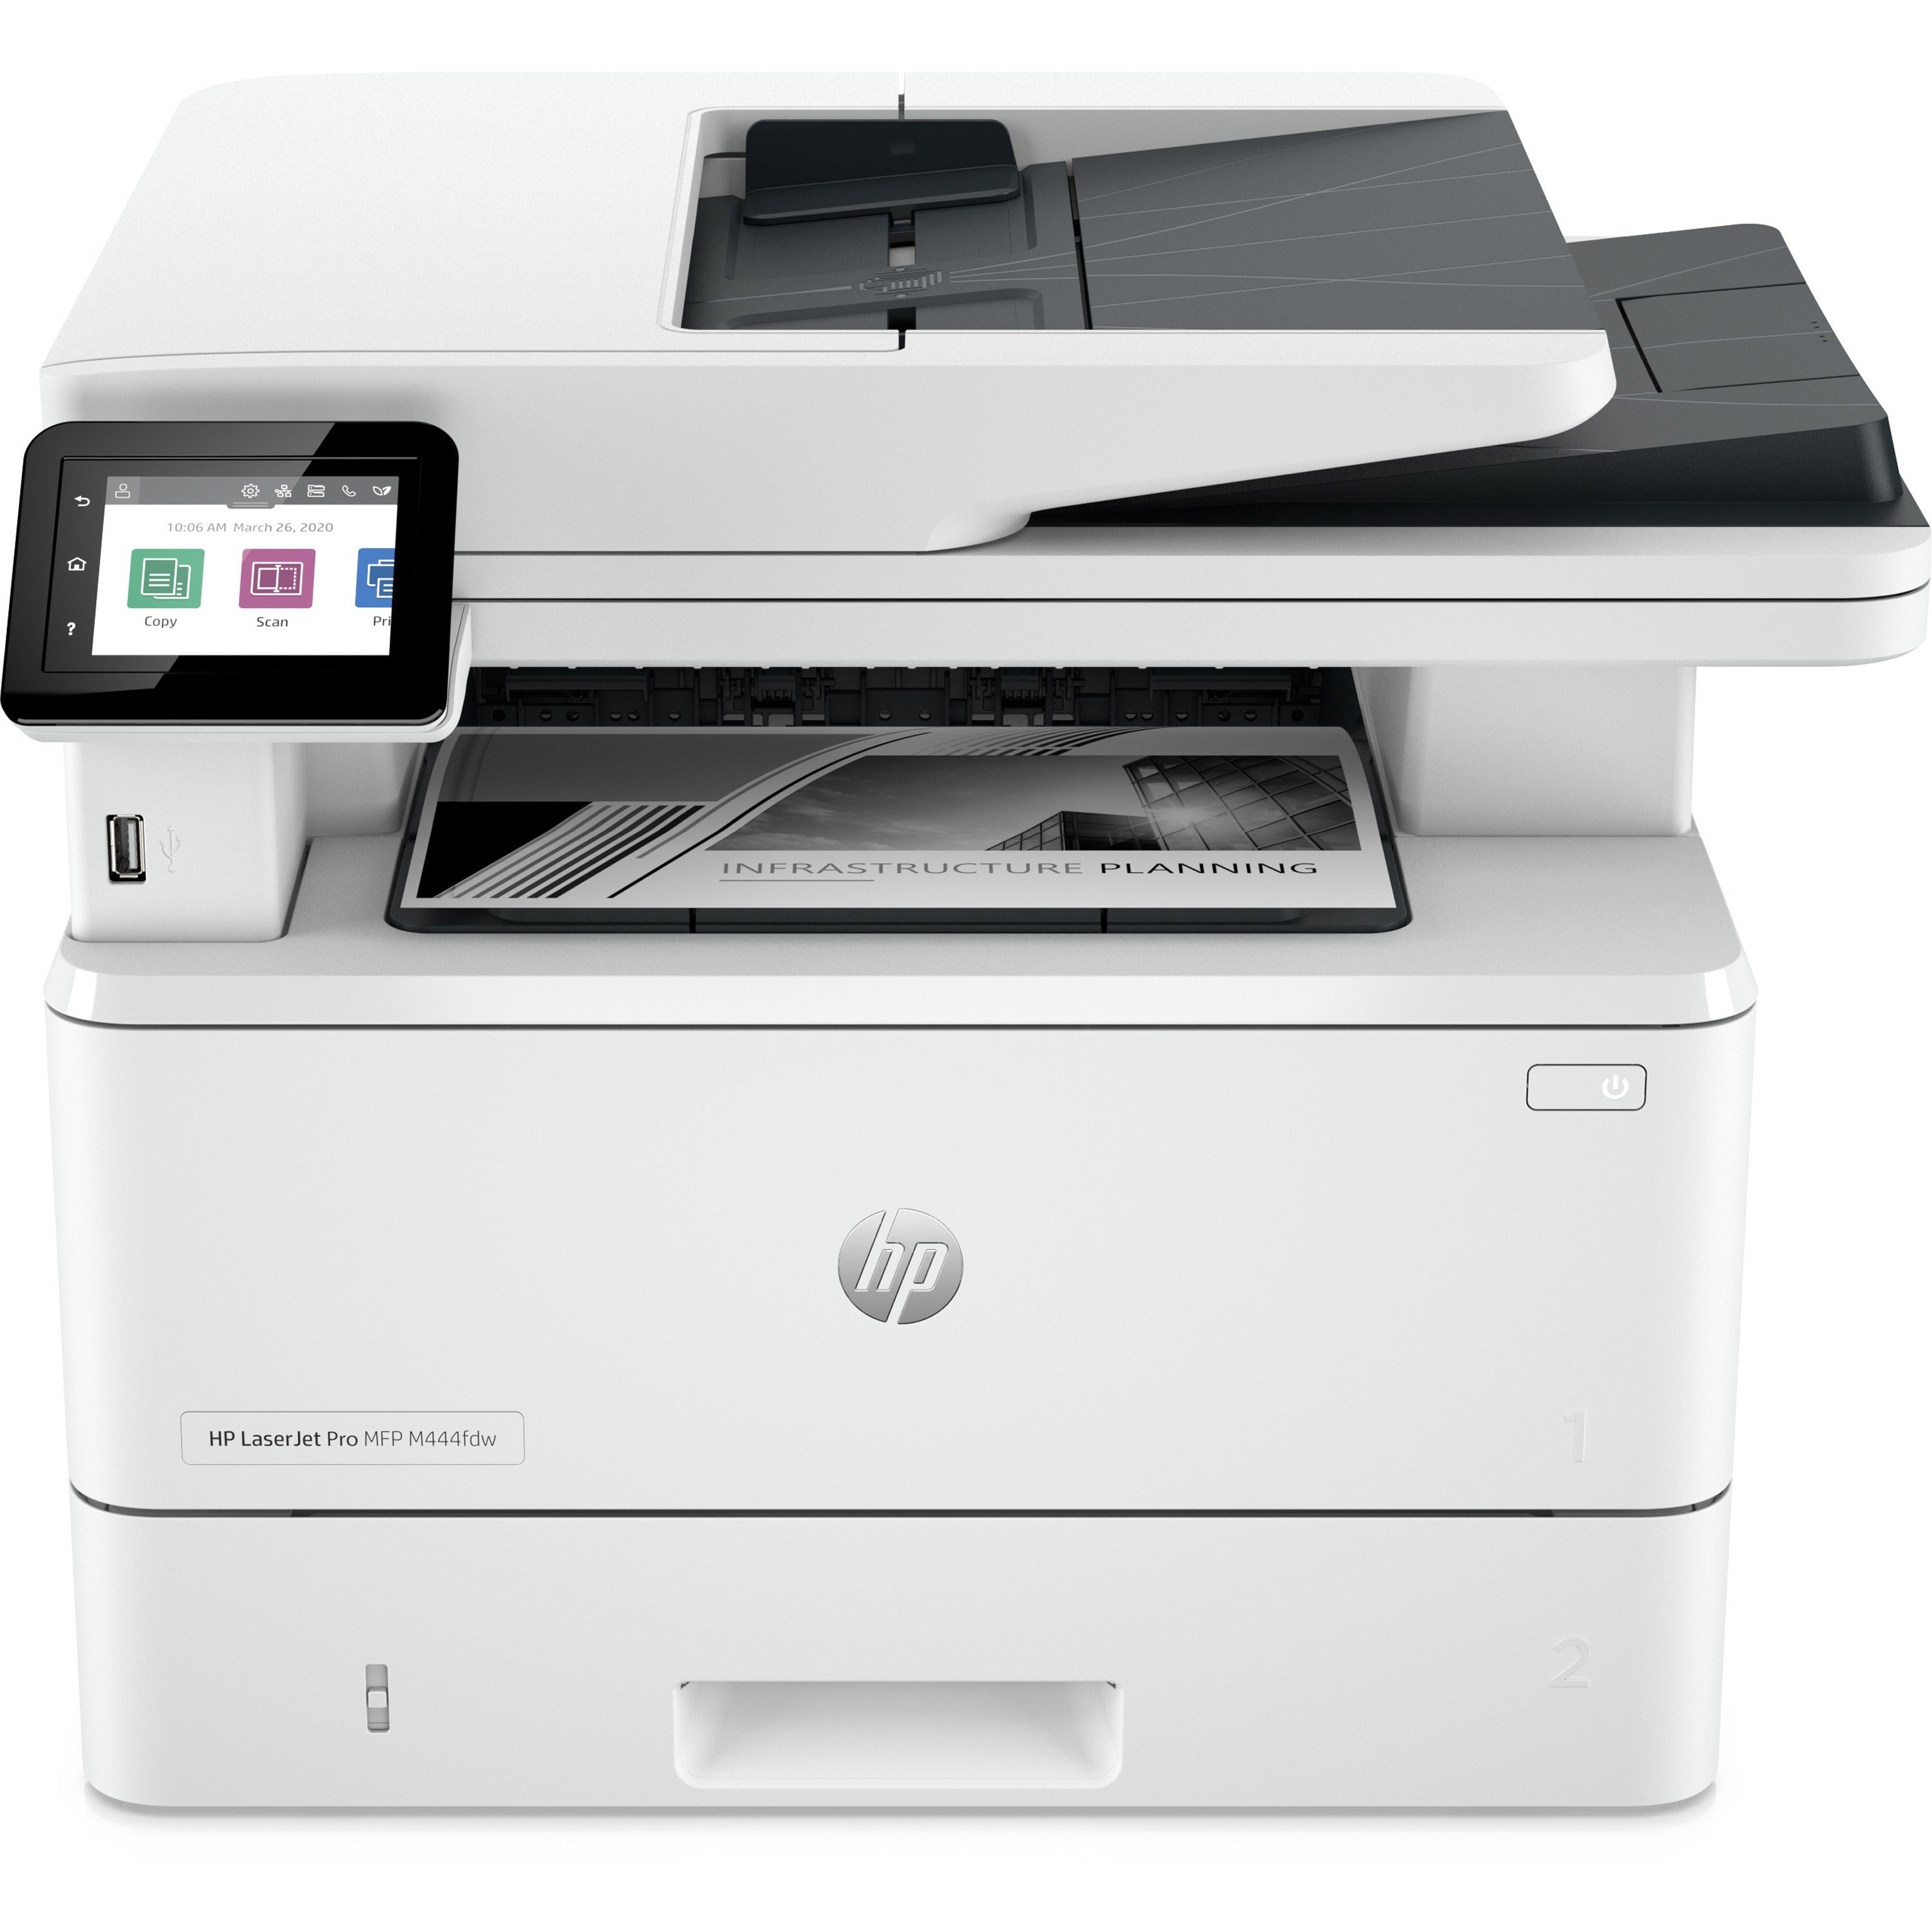 hp-laserjet-pro-4101fdw-wireless-laser-multifunction-printer-monochrome-white-copier-fax-printer-scanner-4800-x-600-dpi-print-automatic-duplex-print-up-to-80000-pages-monthly-color-flatbed-scanner-1200-dpi-optical-scan-monochrome-fa_hew2z619f - 1